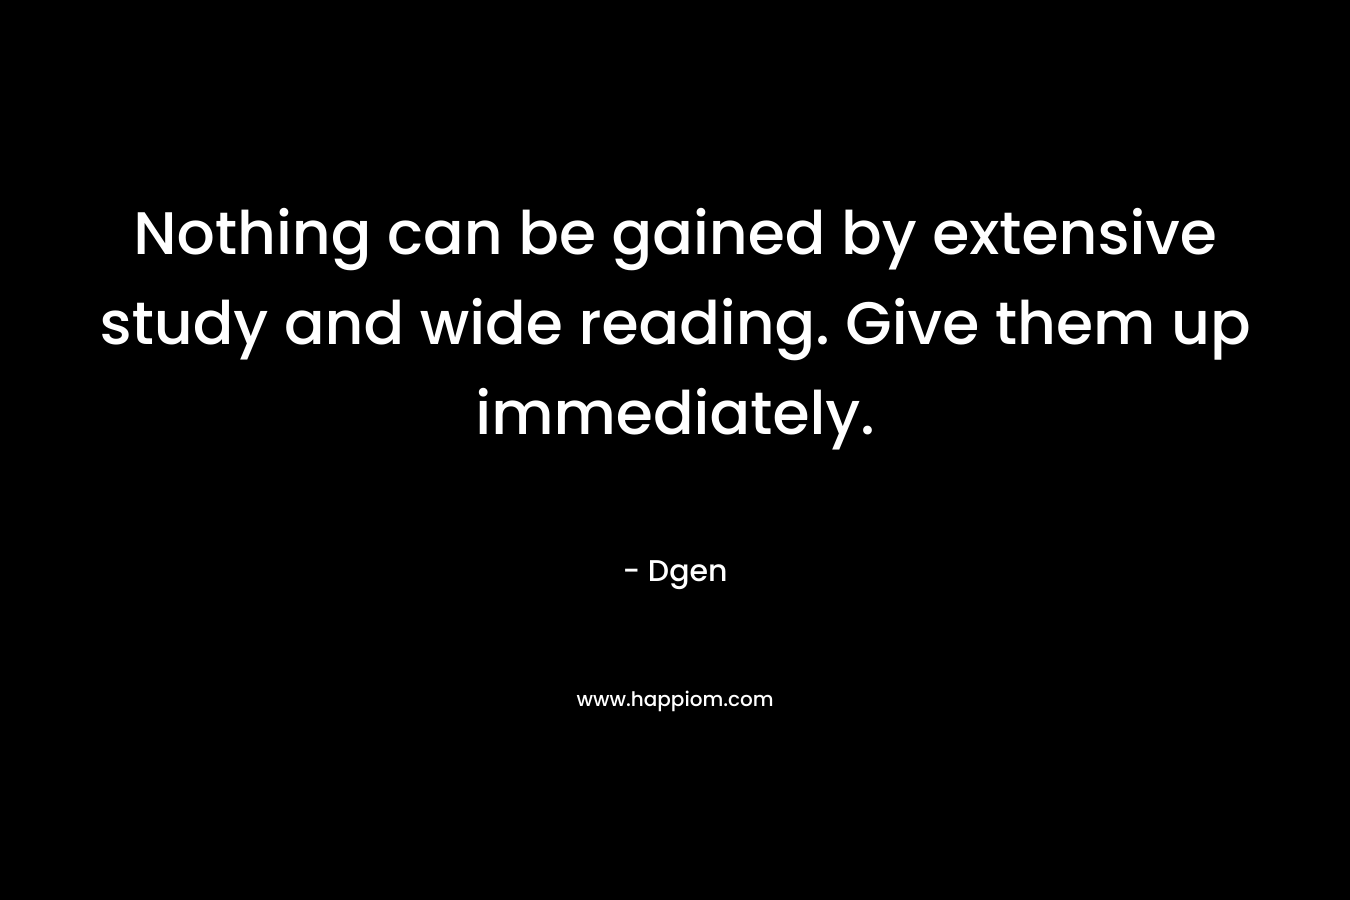 Nothing can be gained by extensive study and wide reading. Give them up immediately. – Dgen